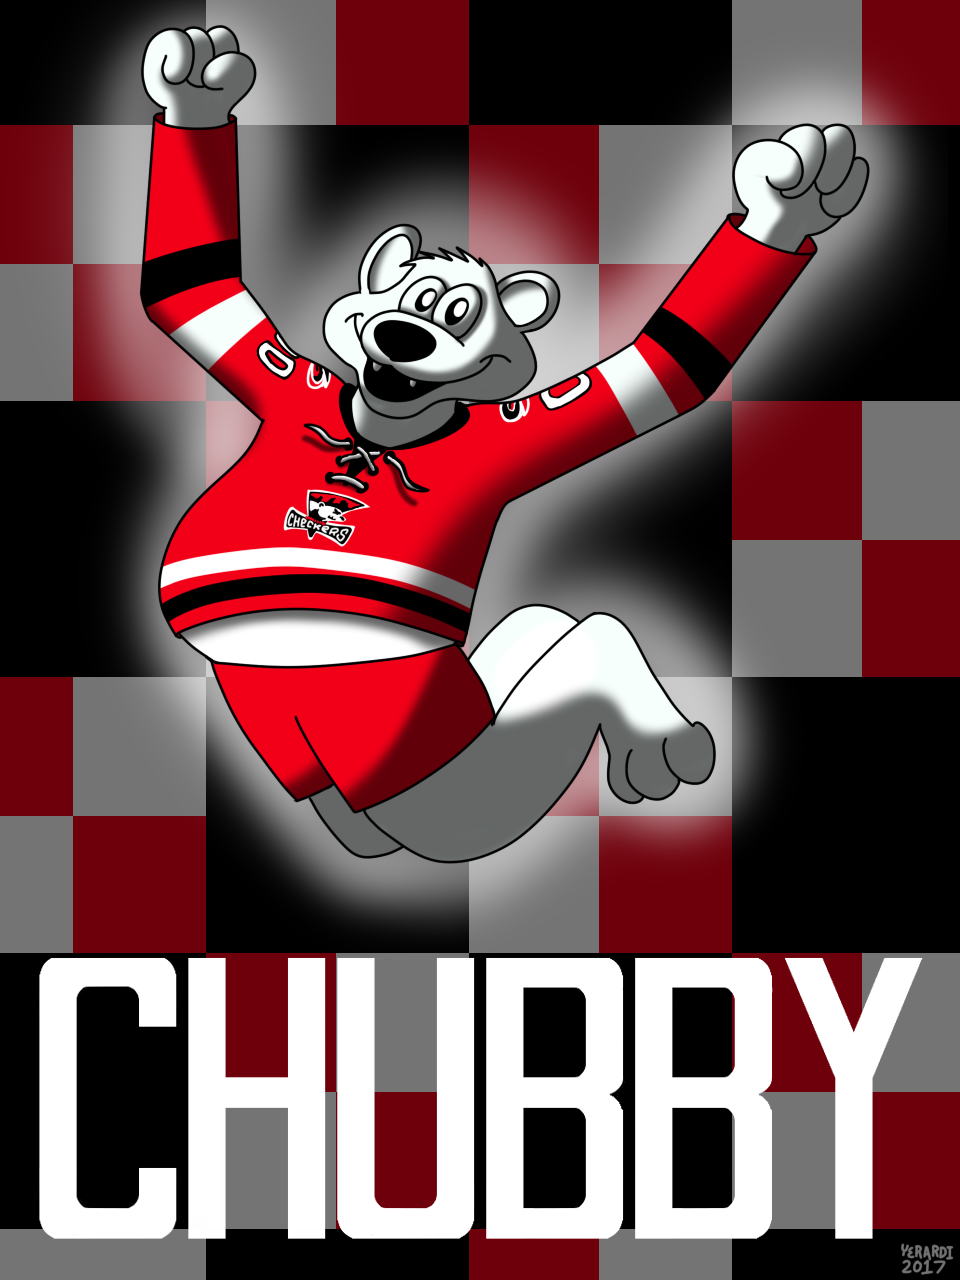 AHL MAX Series Number 15 of 30: Chubby - Charlotte Checkers